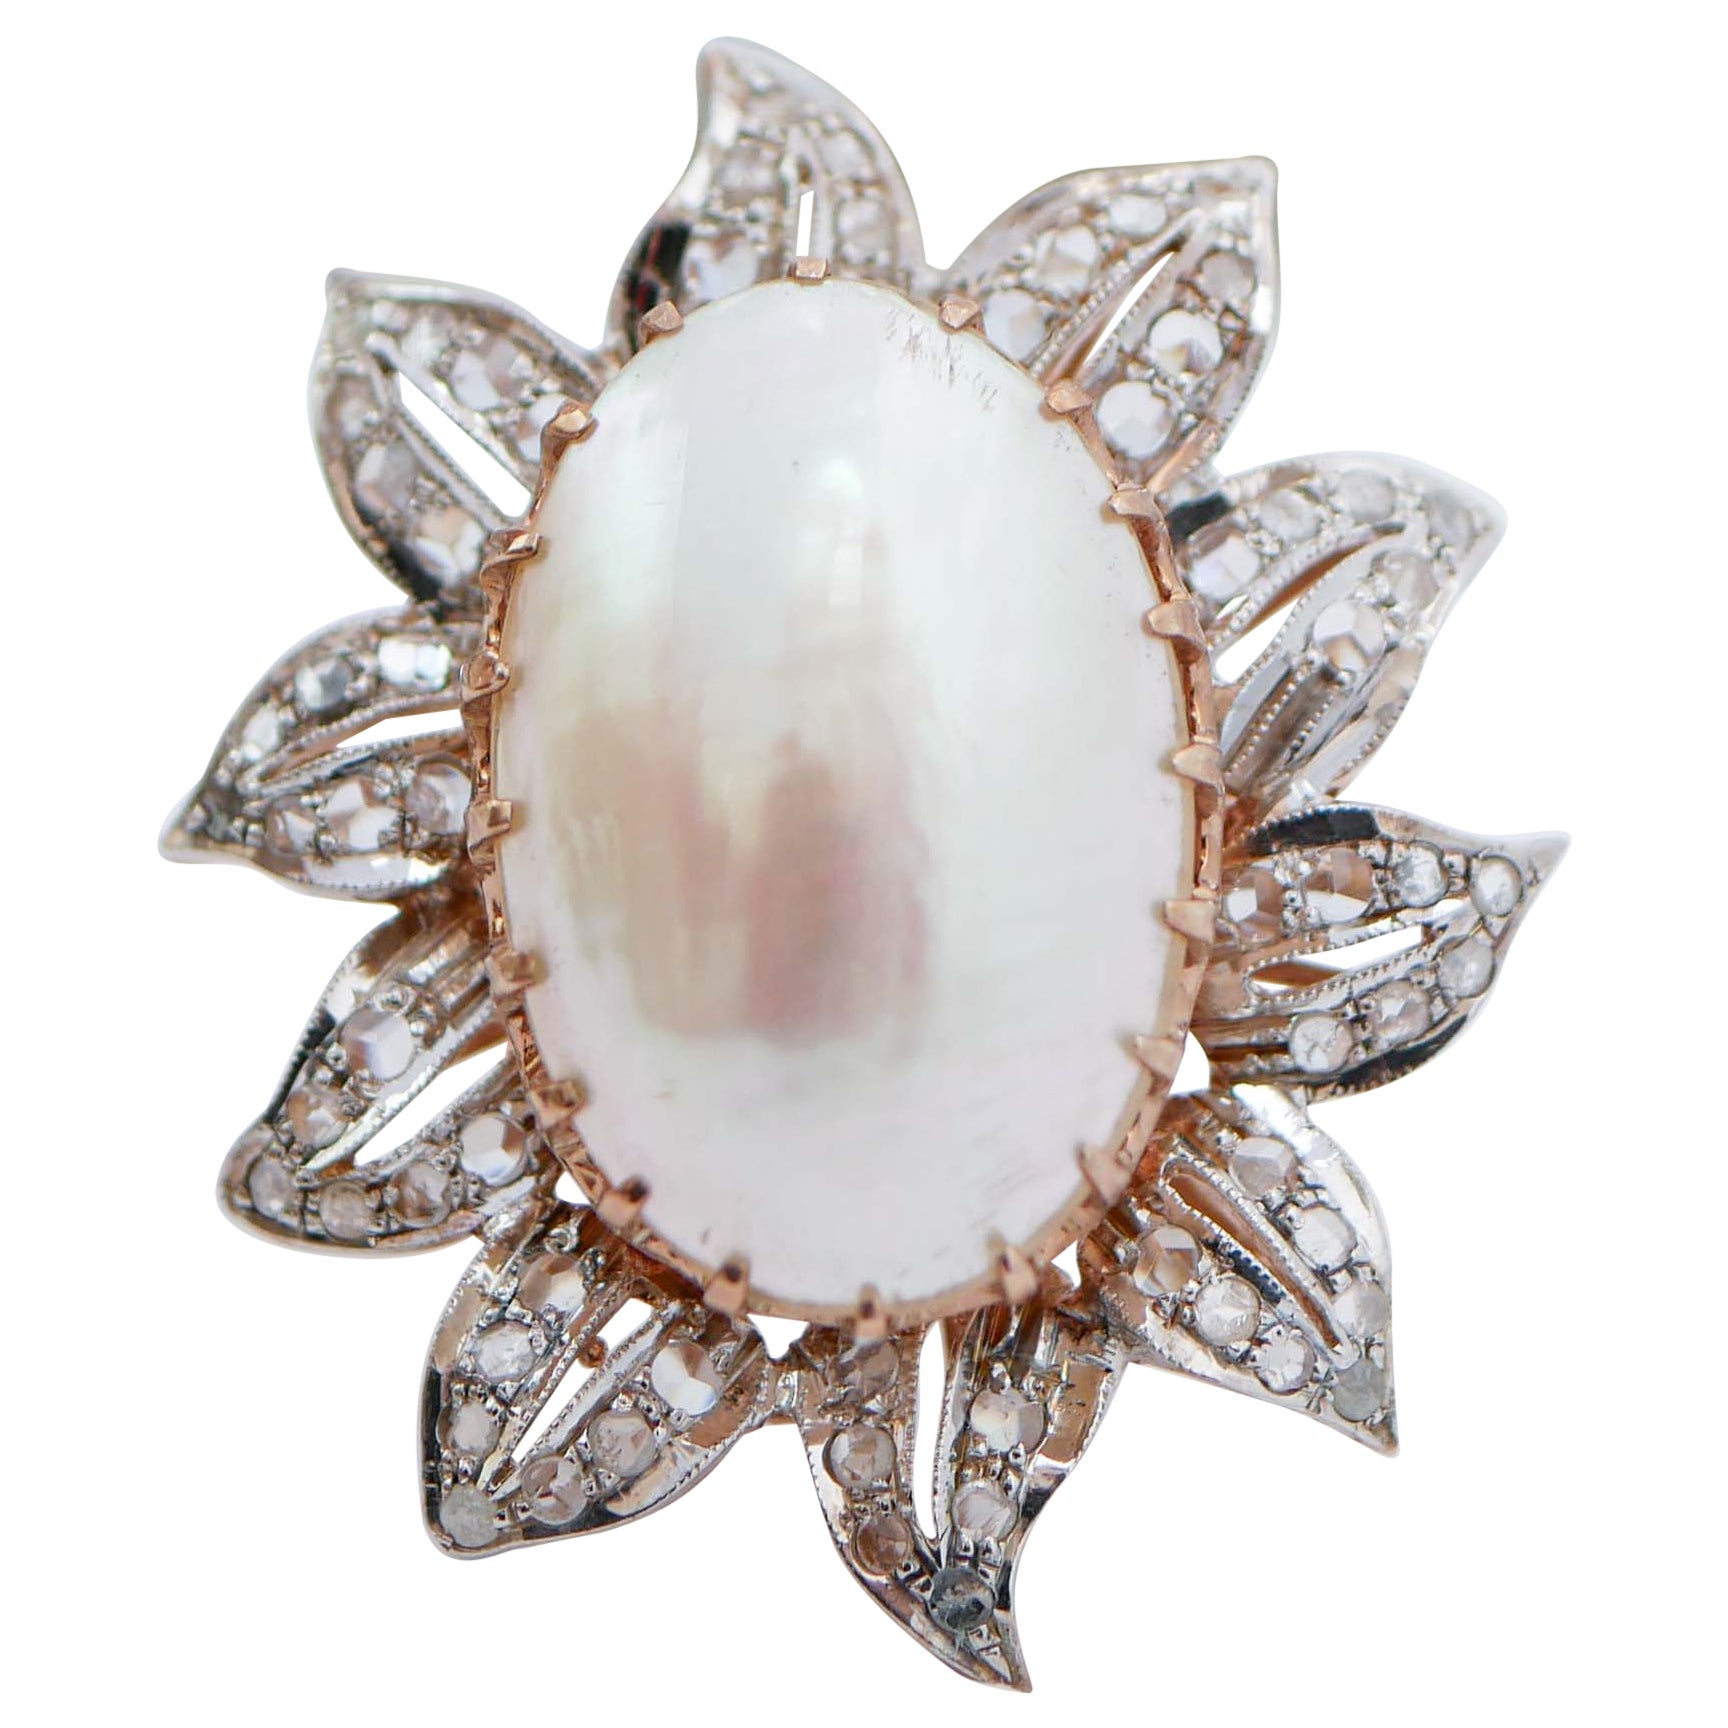 Mabè Pearl, Diamonds, Rose Gold and Silver Flower Ring. For Sale